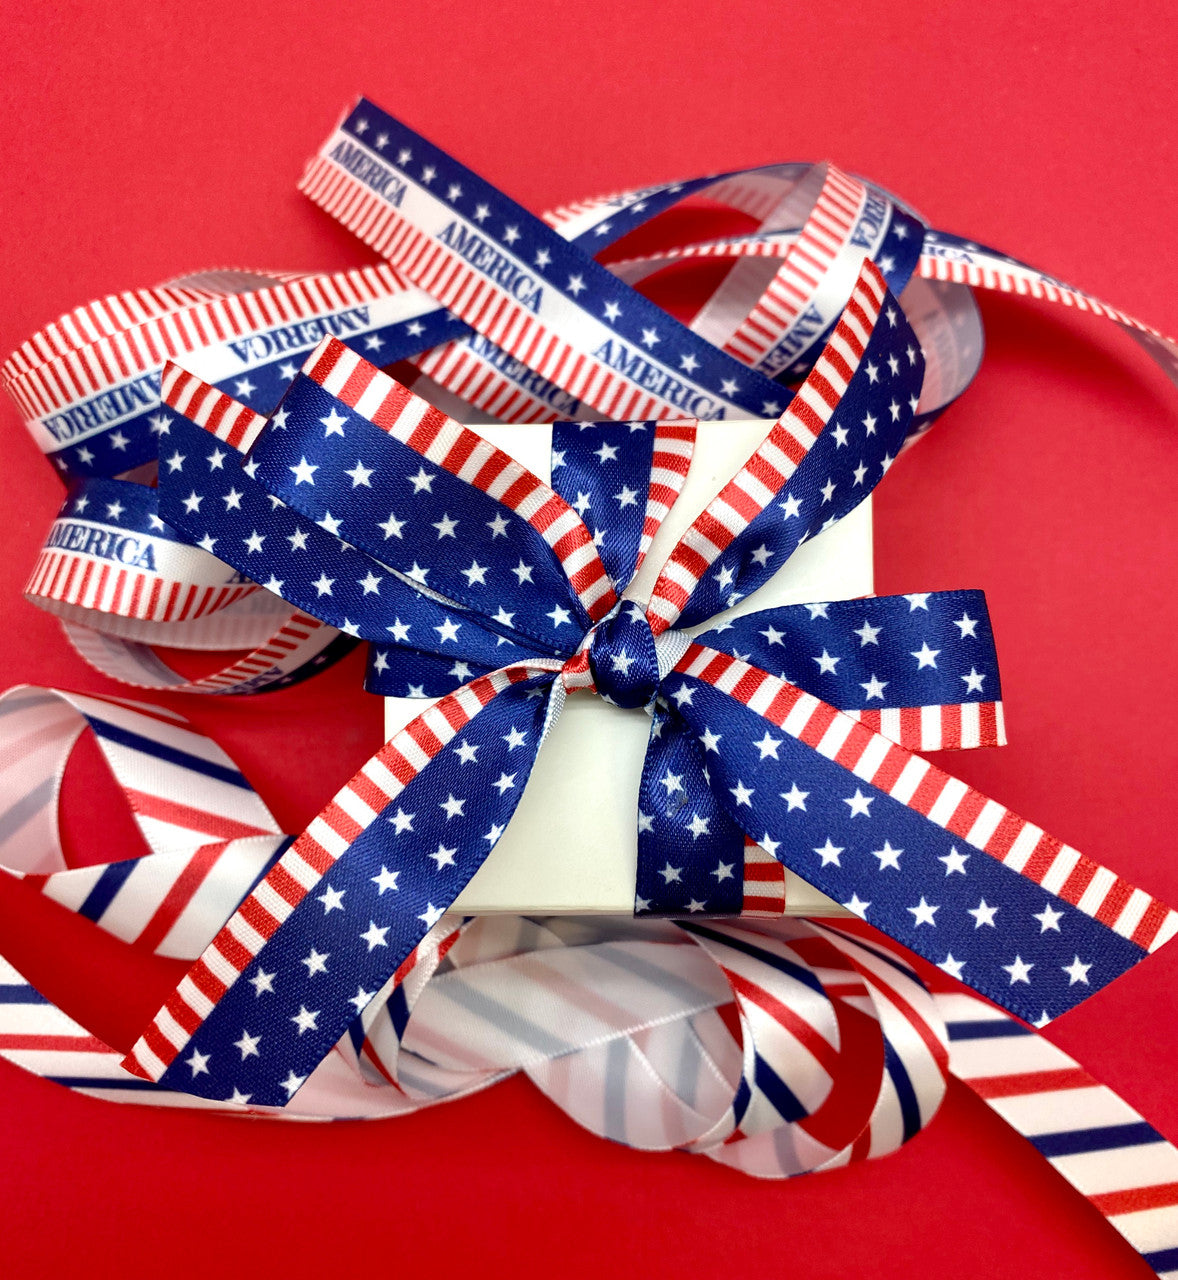 Tie a bow on a favor box to decorate your sweets table in Patriotic style.